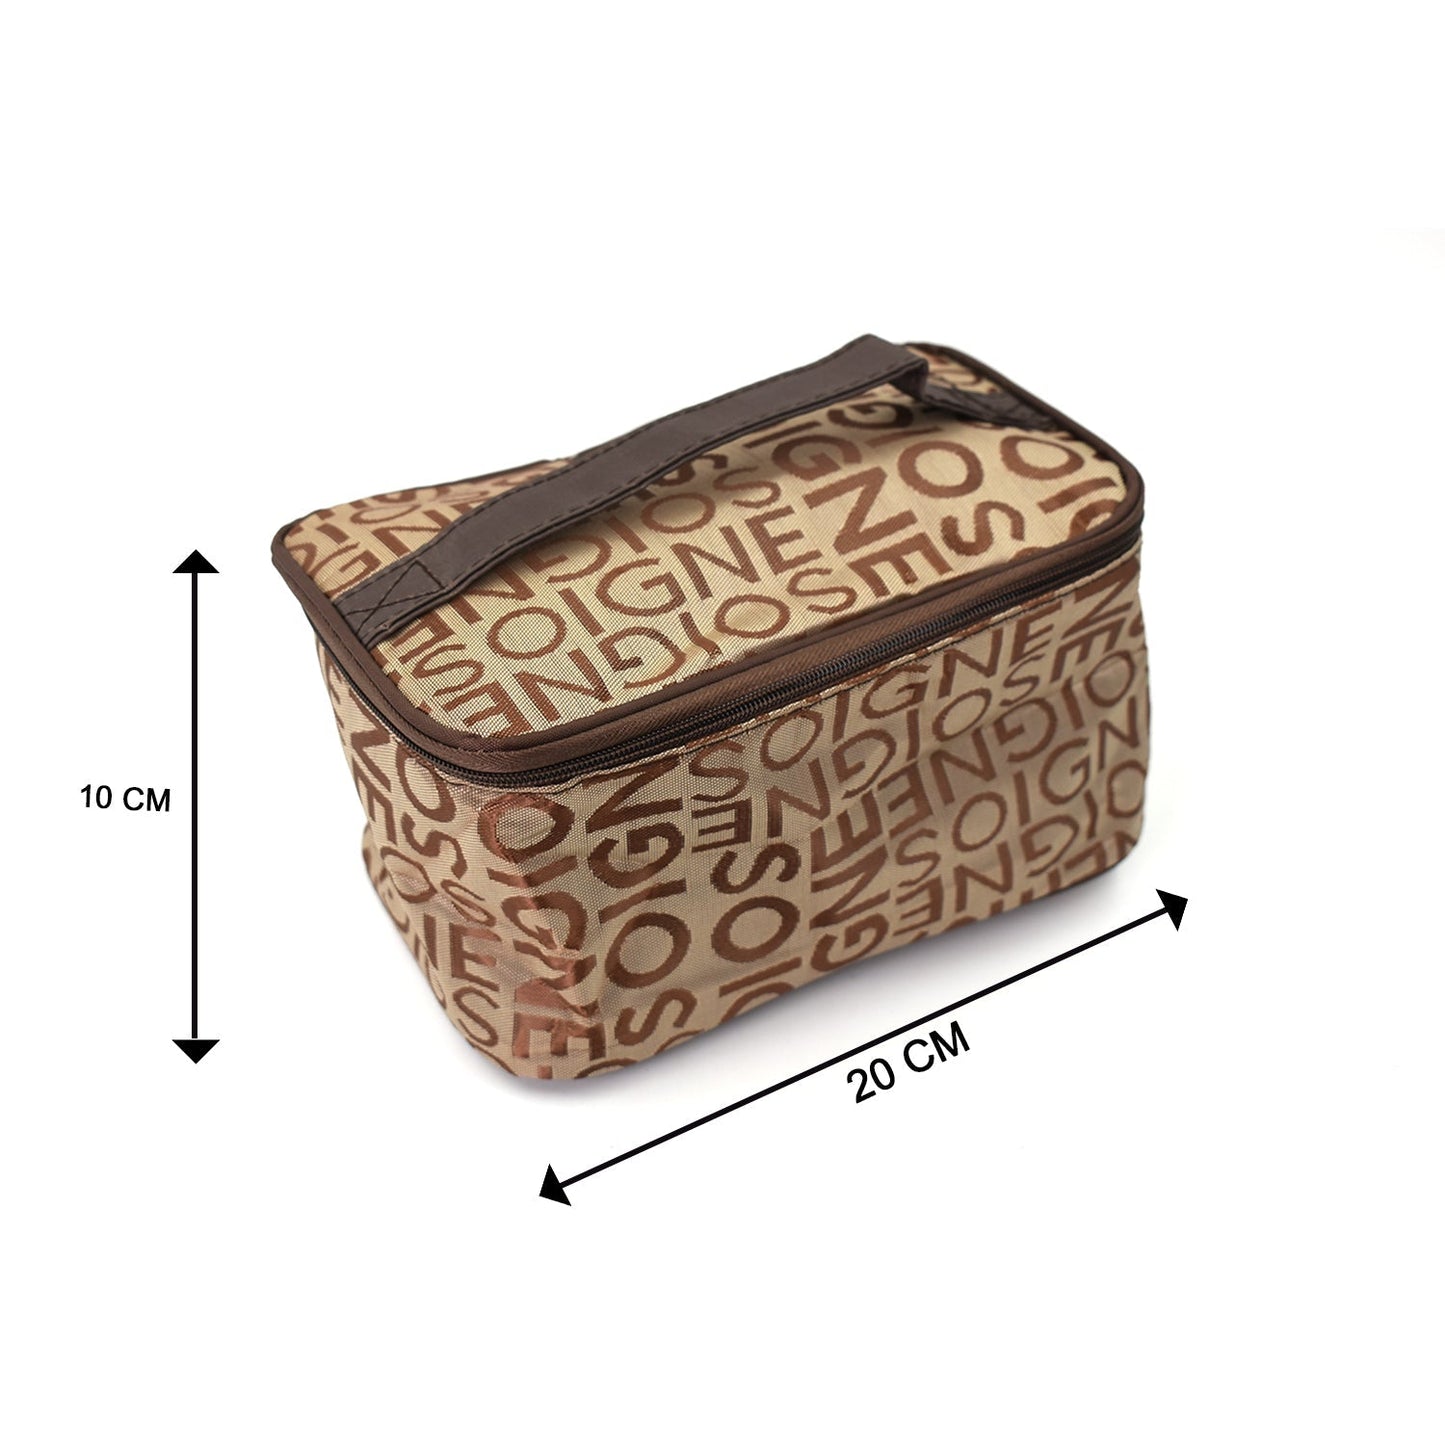 Portable Makeup Bag for storing makeup equipment’s while travelling